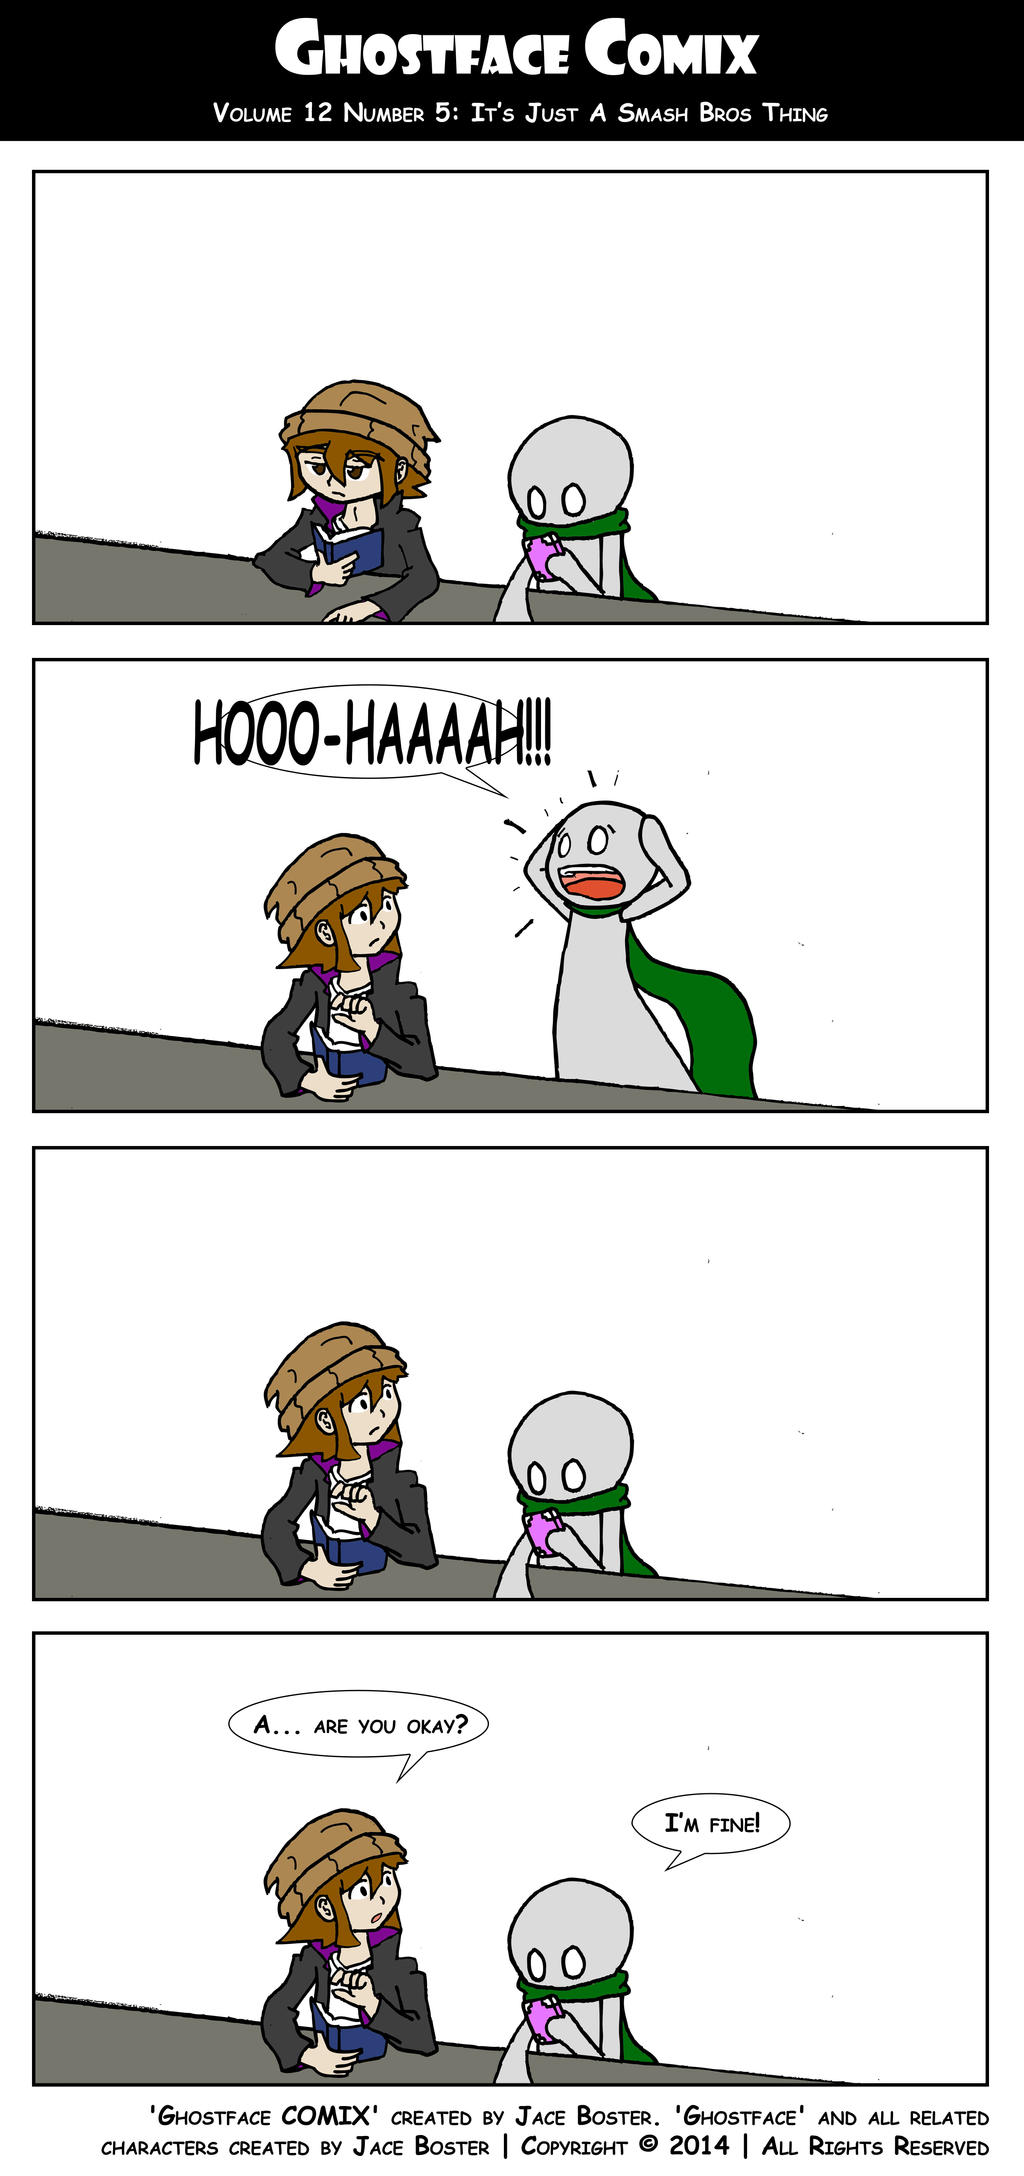 Gf Comix It S Just A Smash Bros Thing 12 5 By Ghostfacecomix On Deviantart